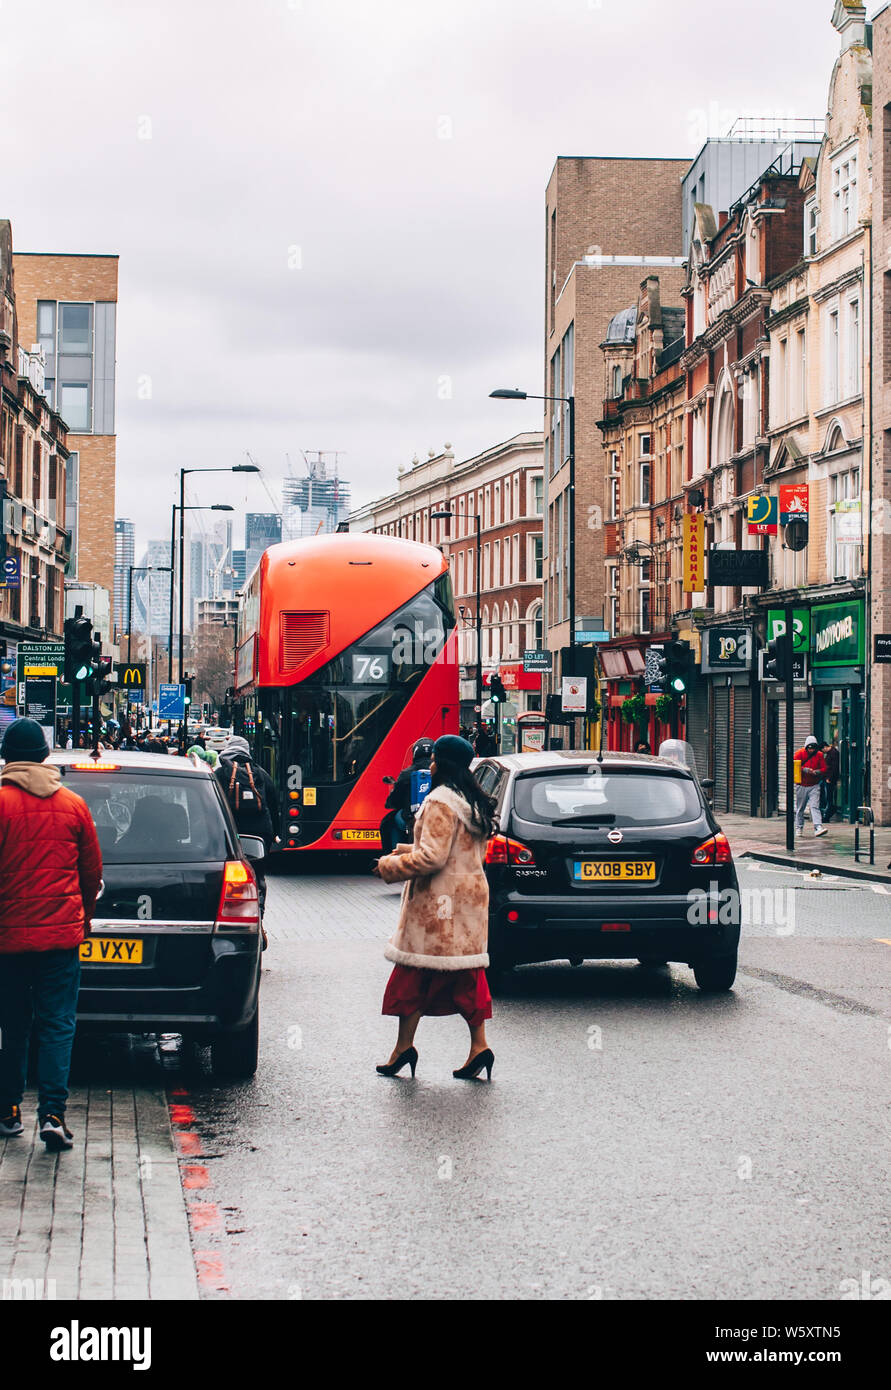 A stylish woman crosses the road in Dalston, East London during winter. Stock Photo